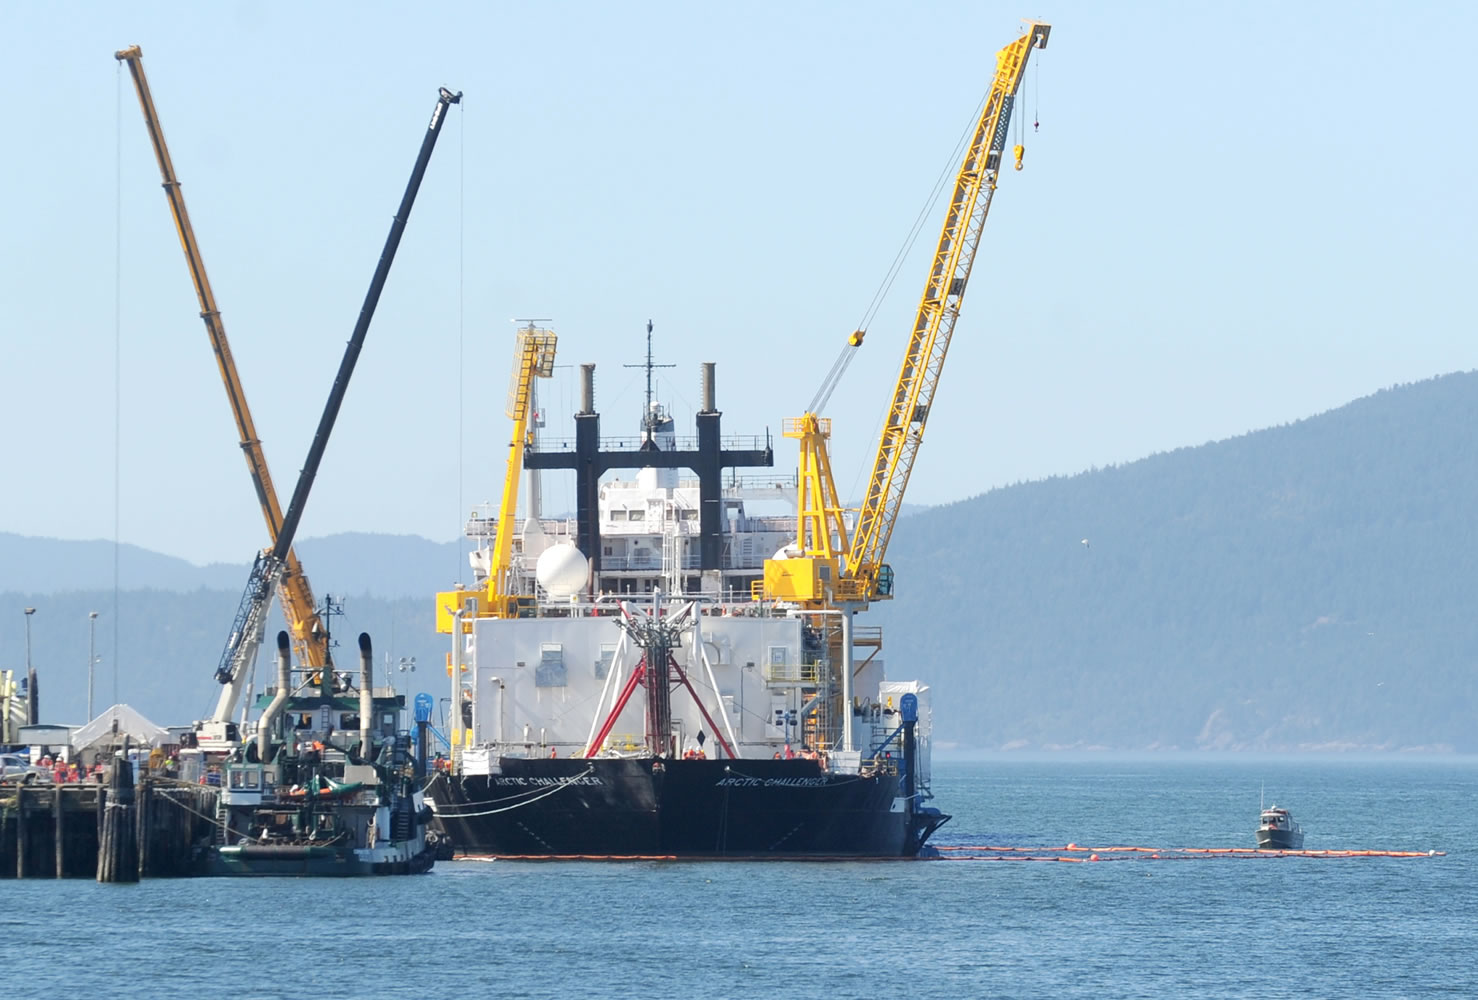 The Arctic Challenger is a containment barge designed to capture oil spilled during drilling.